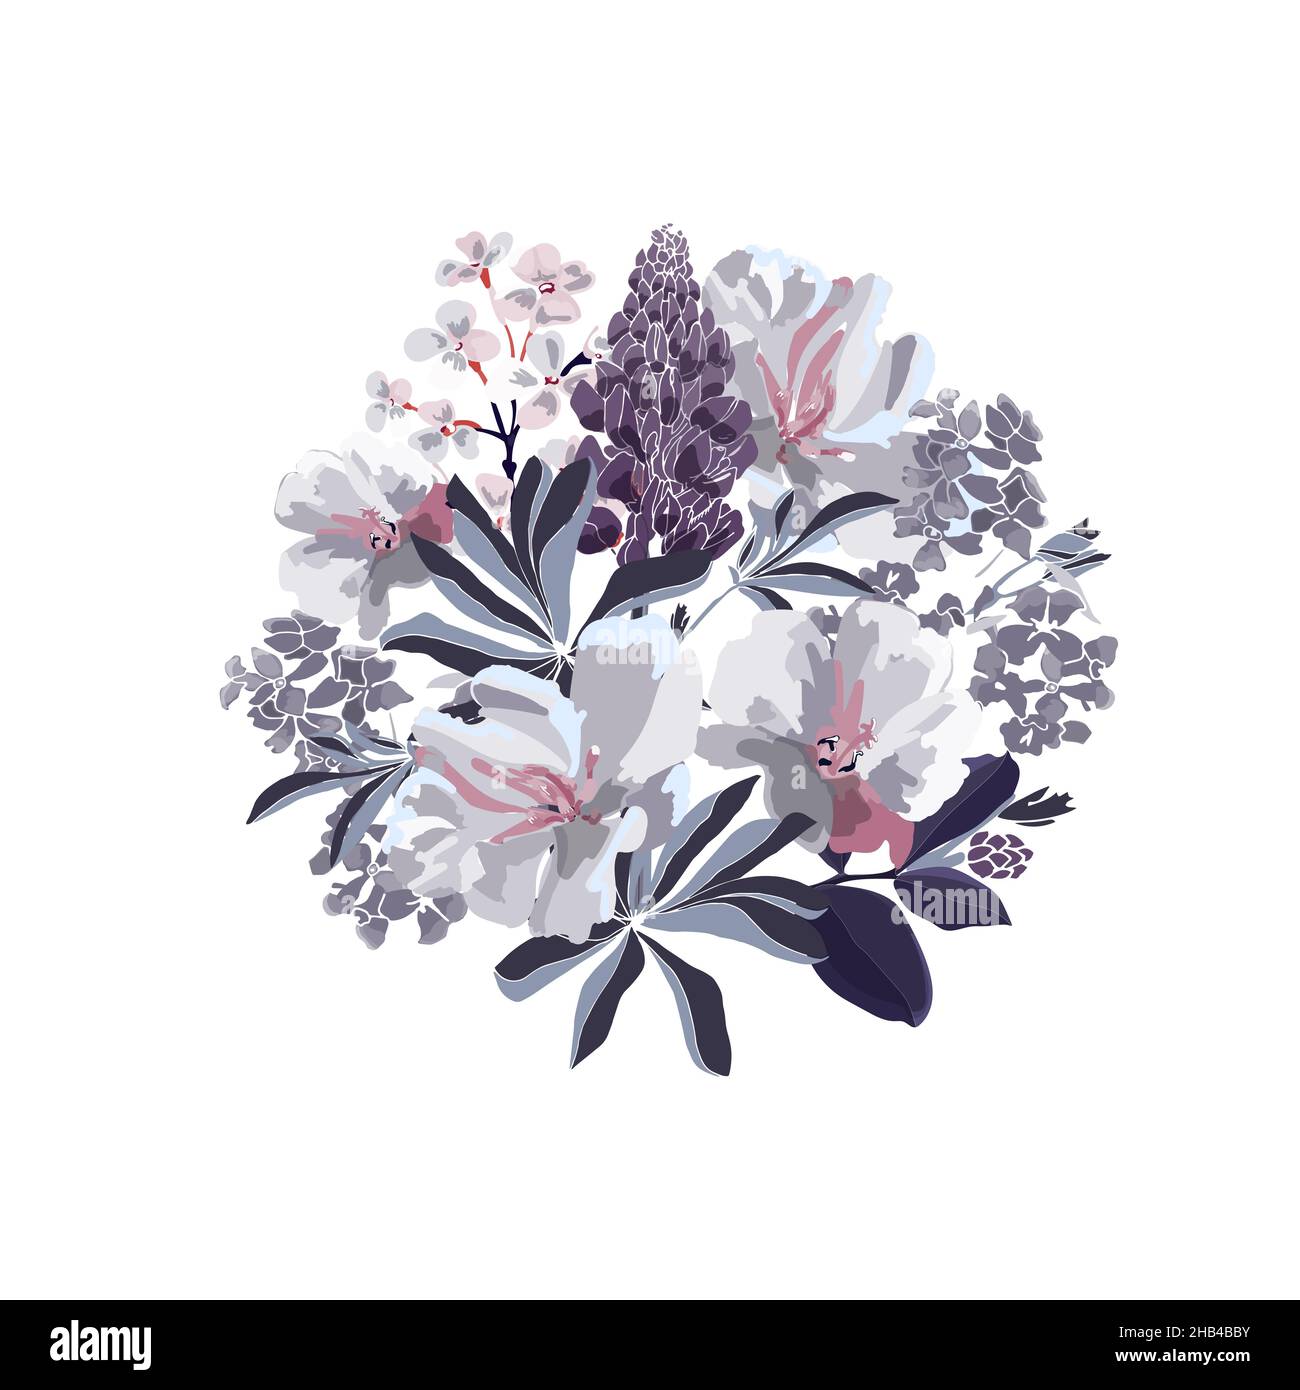 Vector floral illustration. A bouquet of flowers in gray-white and lilac colors on a white background.  Stock Vector